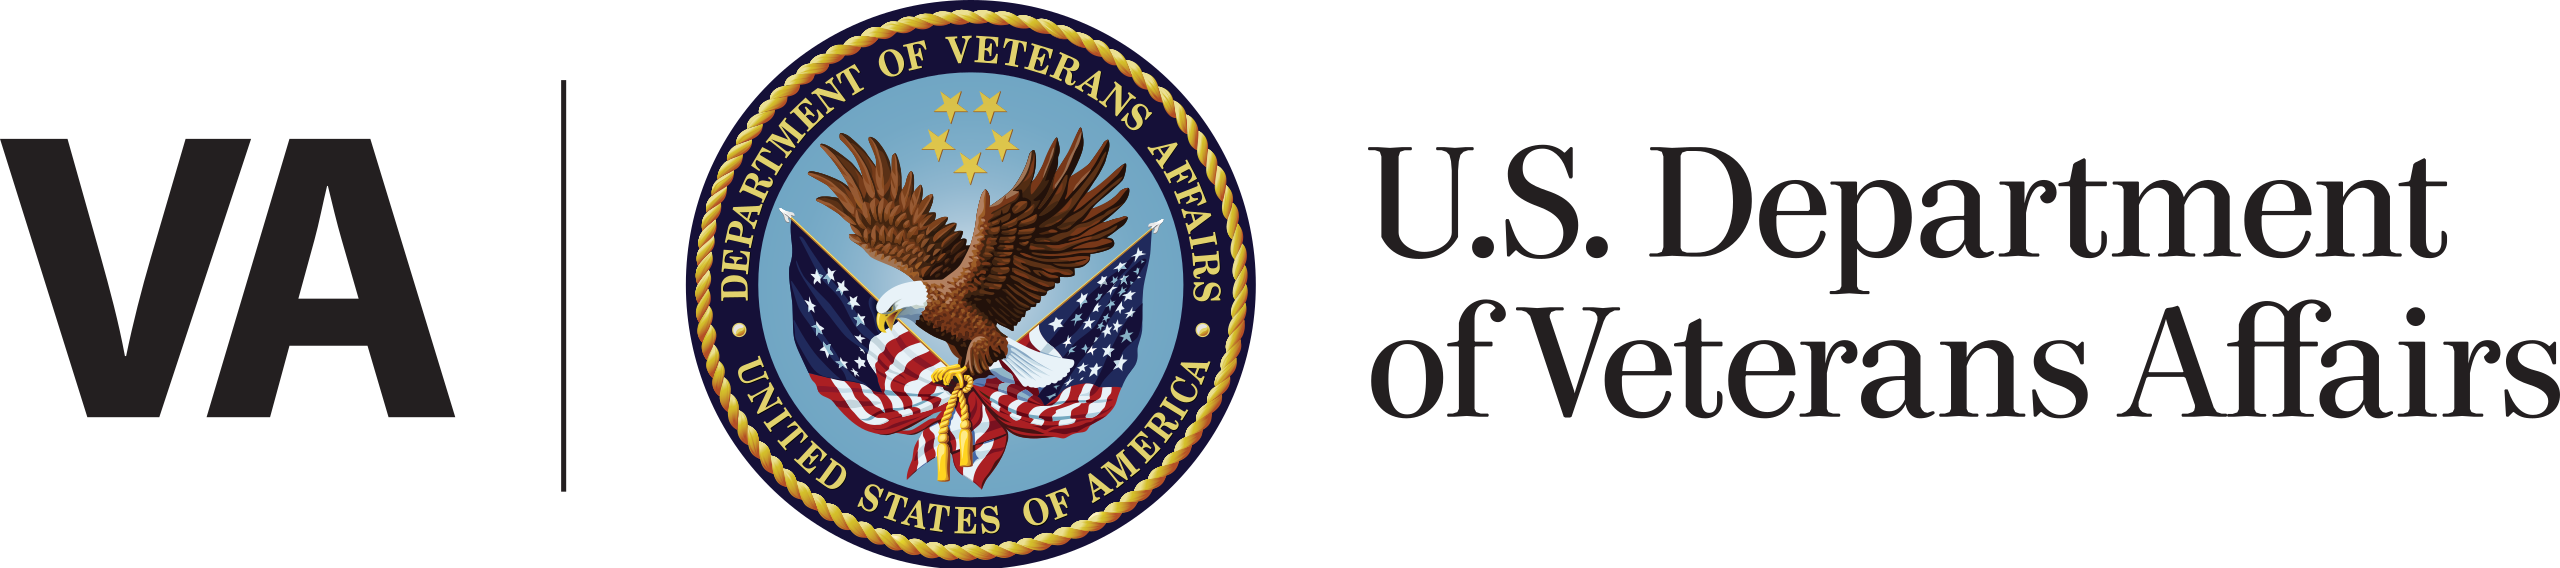 Download File Us Department Of Veterans Affairs Logo Svg Wikimedia Commons